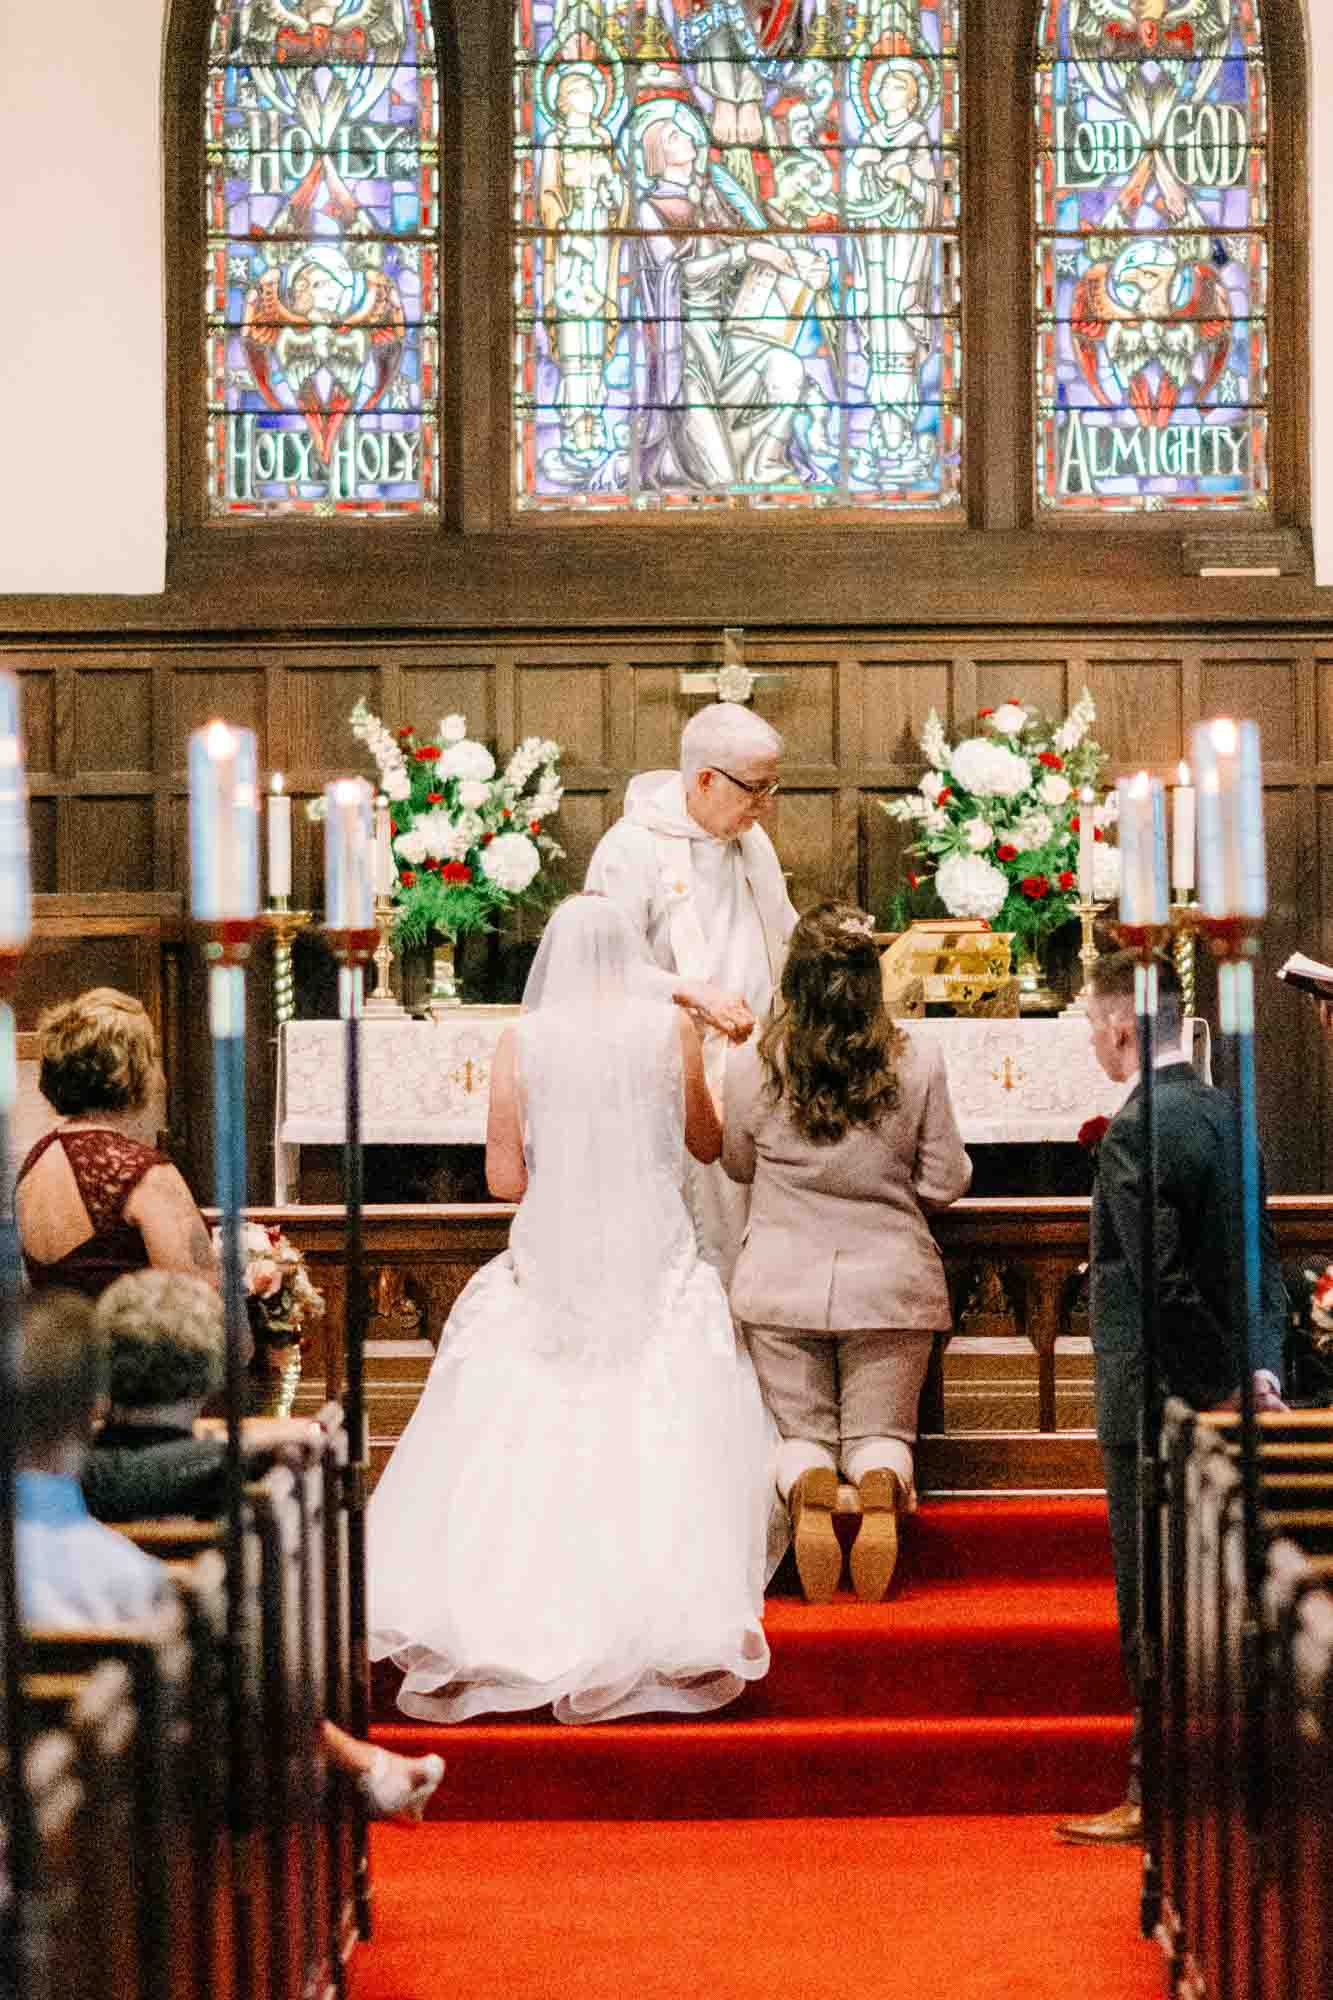 Traditional Episcopal wedding with quirky DIY touches | Jyn Allen Photography | Featured on Equally Wed, the leading LGBTQ+ wedding magazine